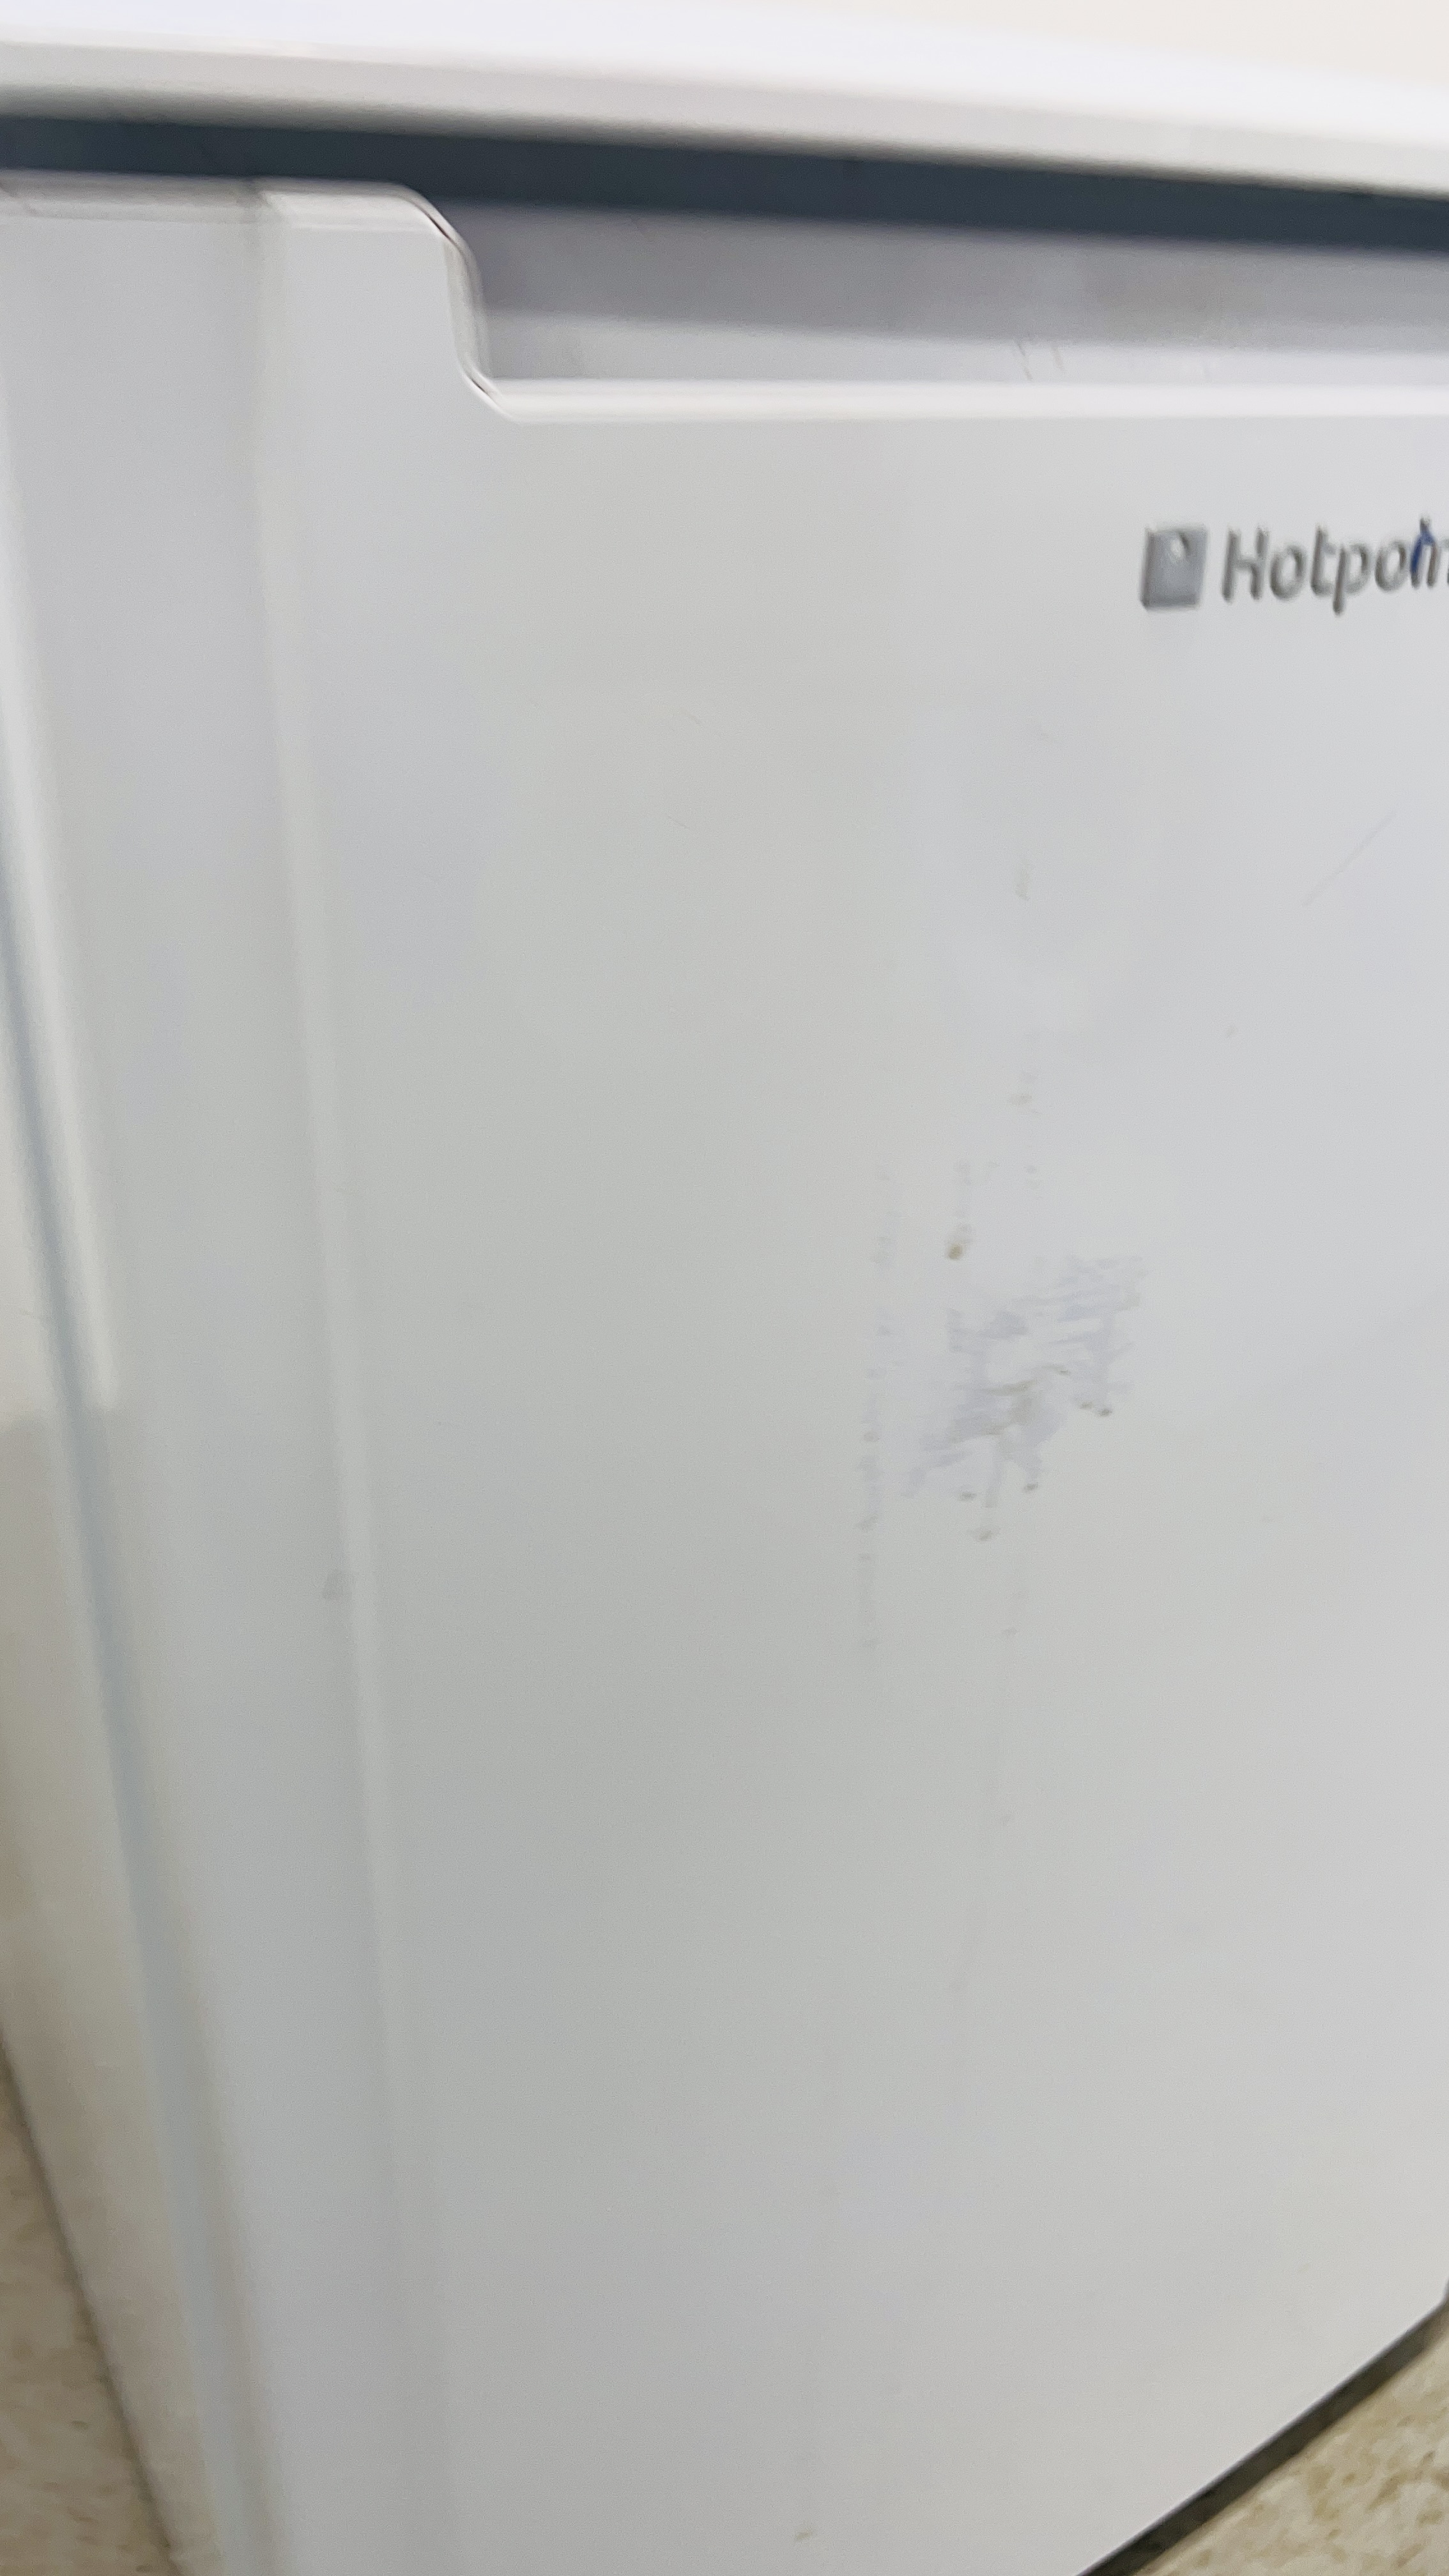 A HOTPOINT UNDER COUNTER FREEZER - SOLD AS SEEN. - Image 5 of 8